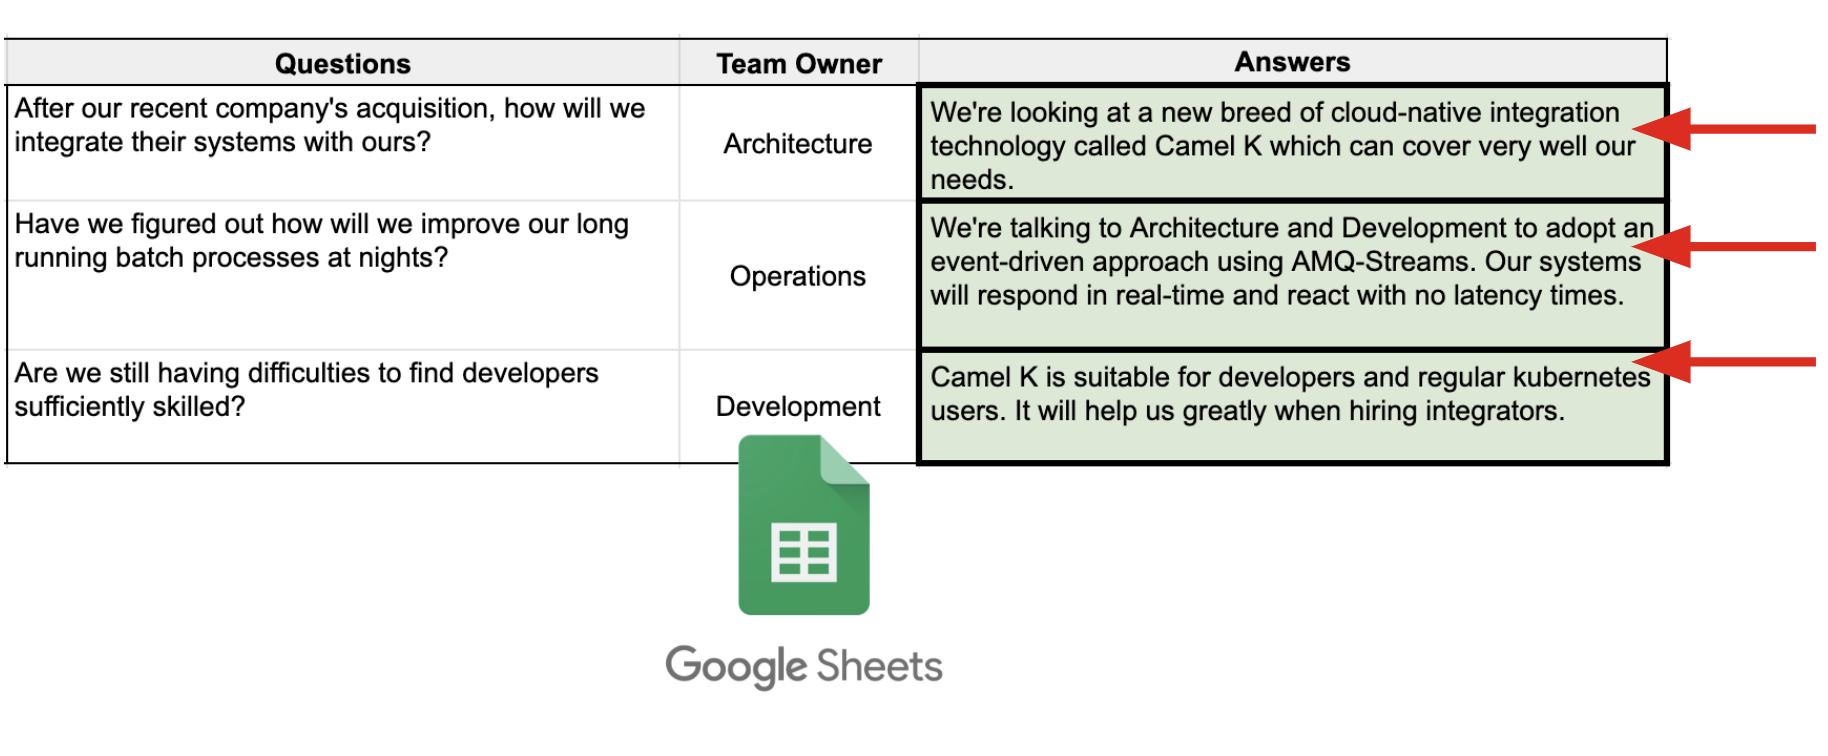 Incoming updates in Google Sheets fill up the Answers column in the document.